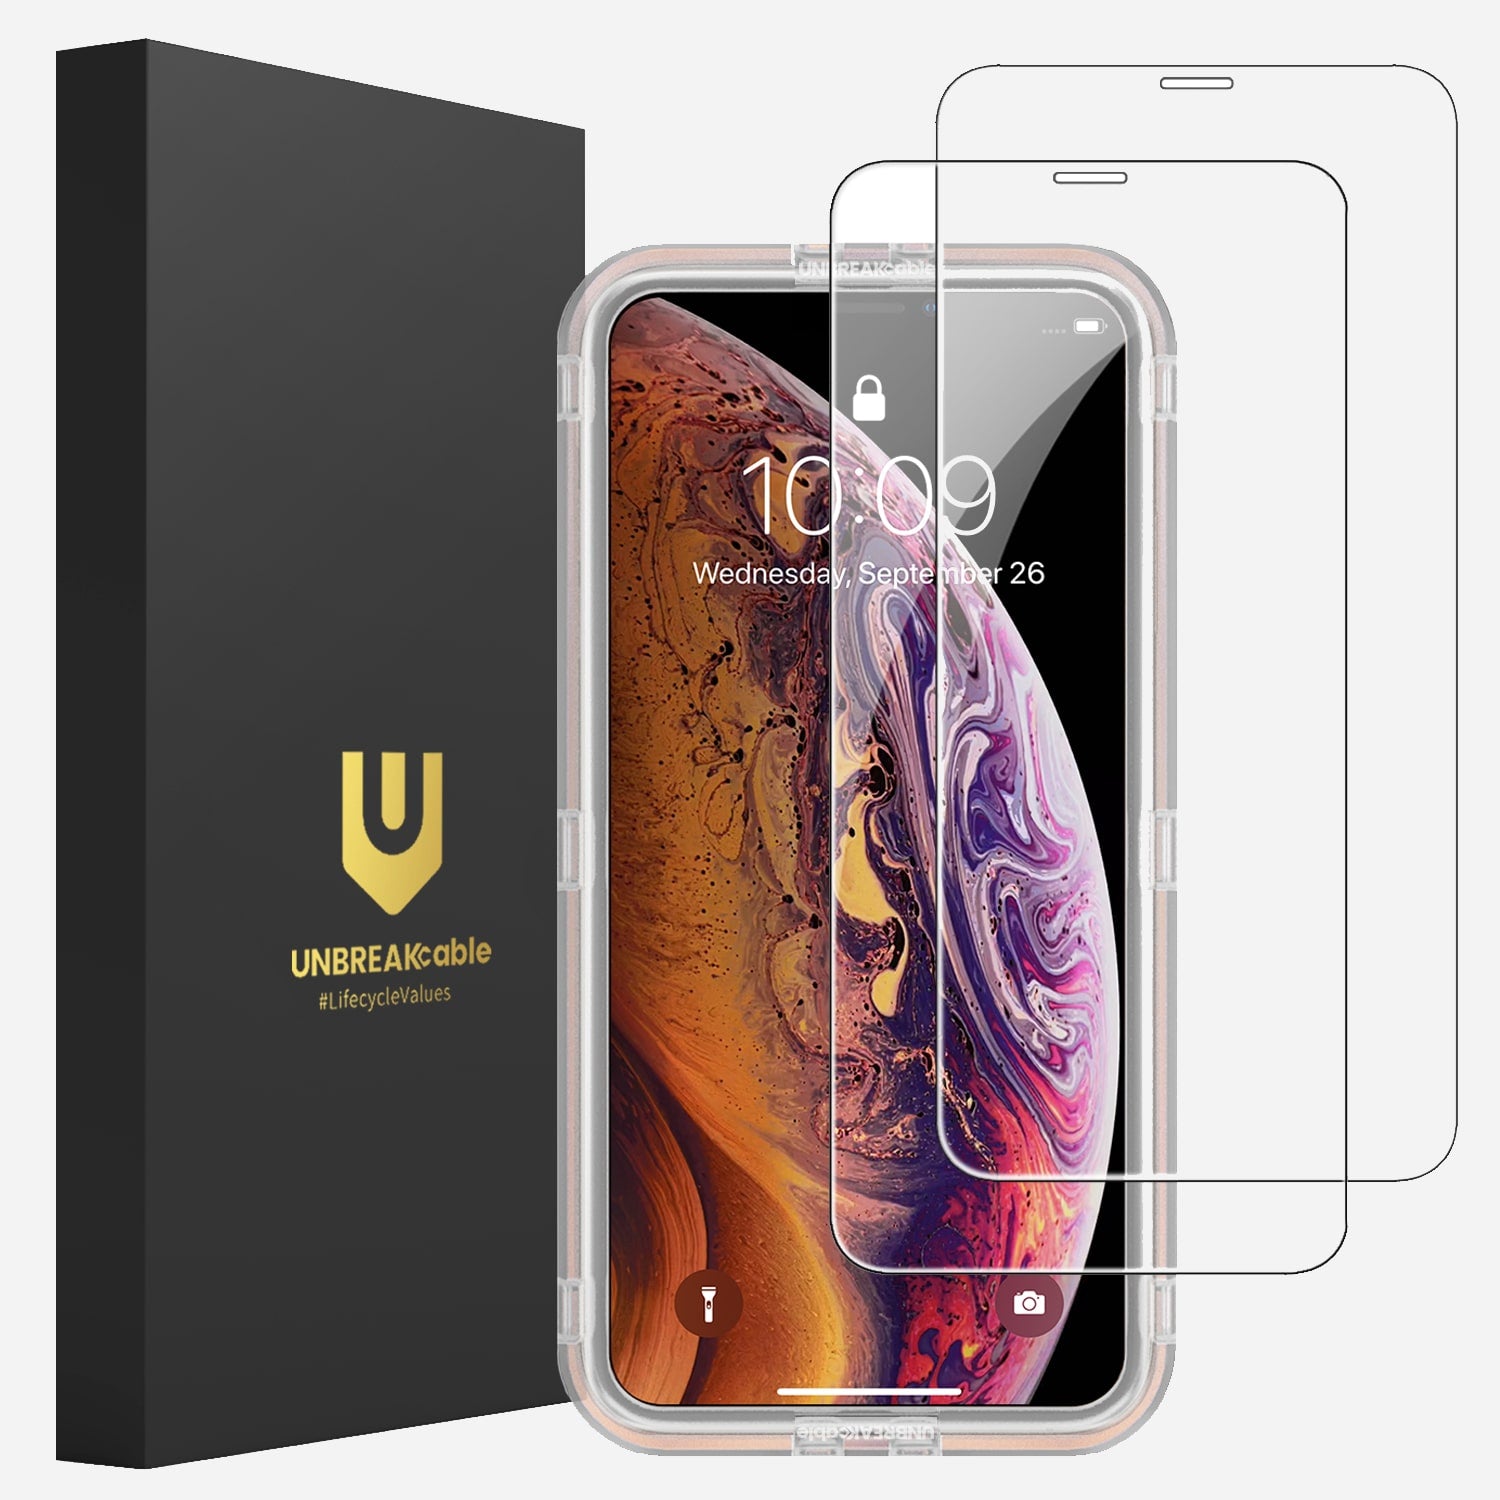 iphone X/XS screen protector with iphone X